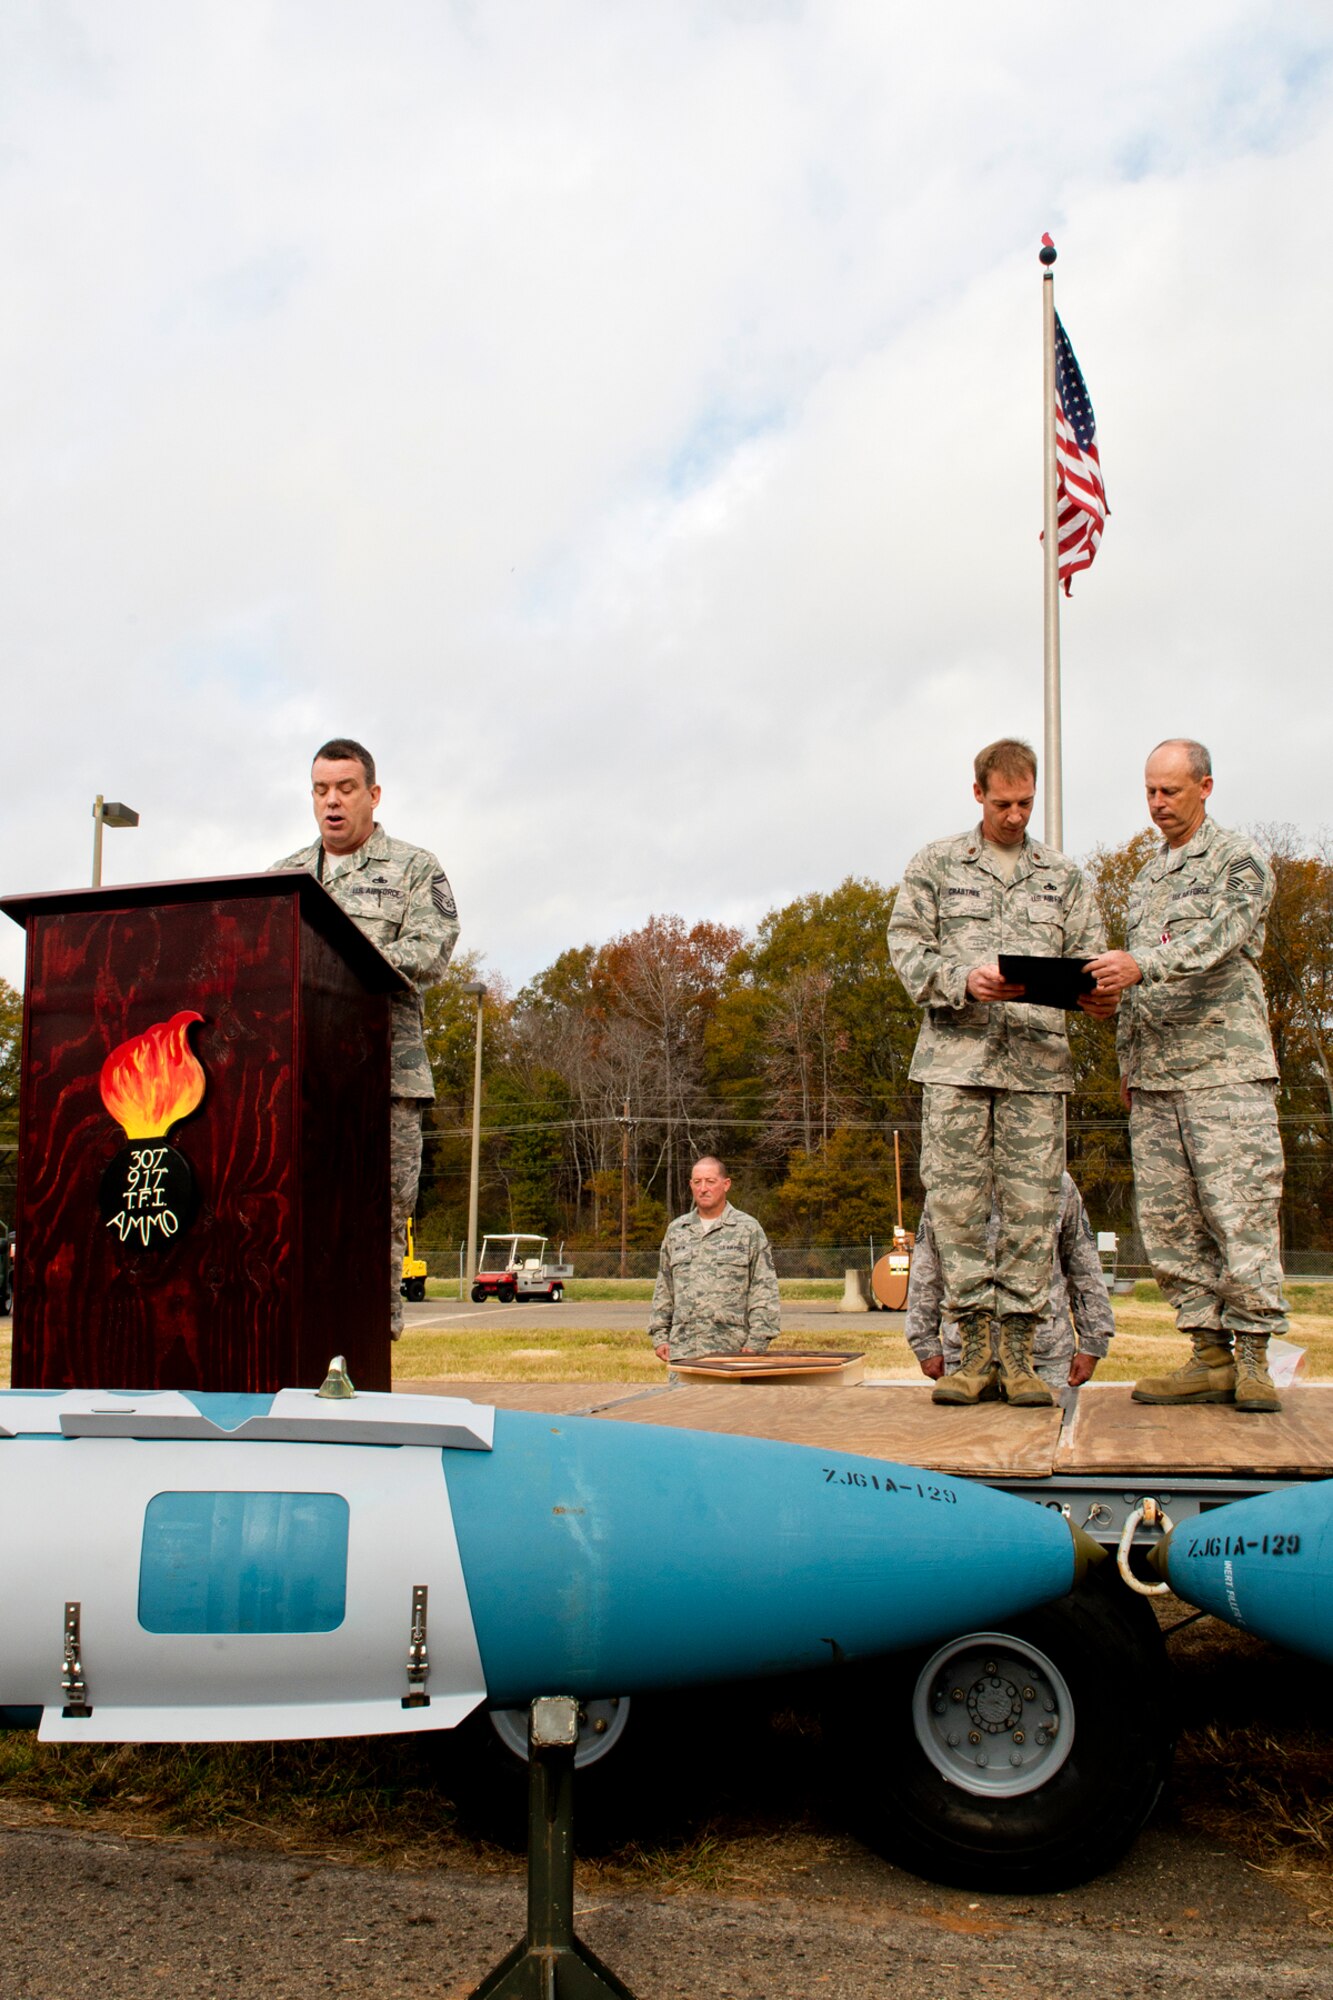 U.S. Air Force Senior Master Sgt. Philip Webber reads the retirement orders during a ceremony for Chief Master Sgt. Bobby Deshotel, Dec. 2, 2012, Barksdale Air Force Base, La. Deshotel is a munitions flight chief assigned to the 307th Maintenance Squadron and is retiring after serving over 24 years in the military. (U.S. Air Force photo by Master Sgt. Greg Steele/Released)